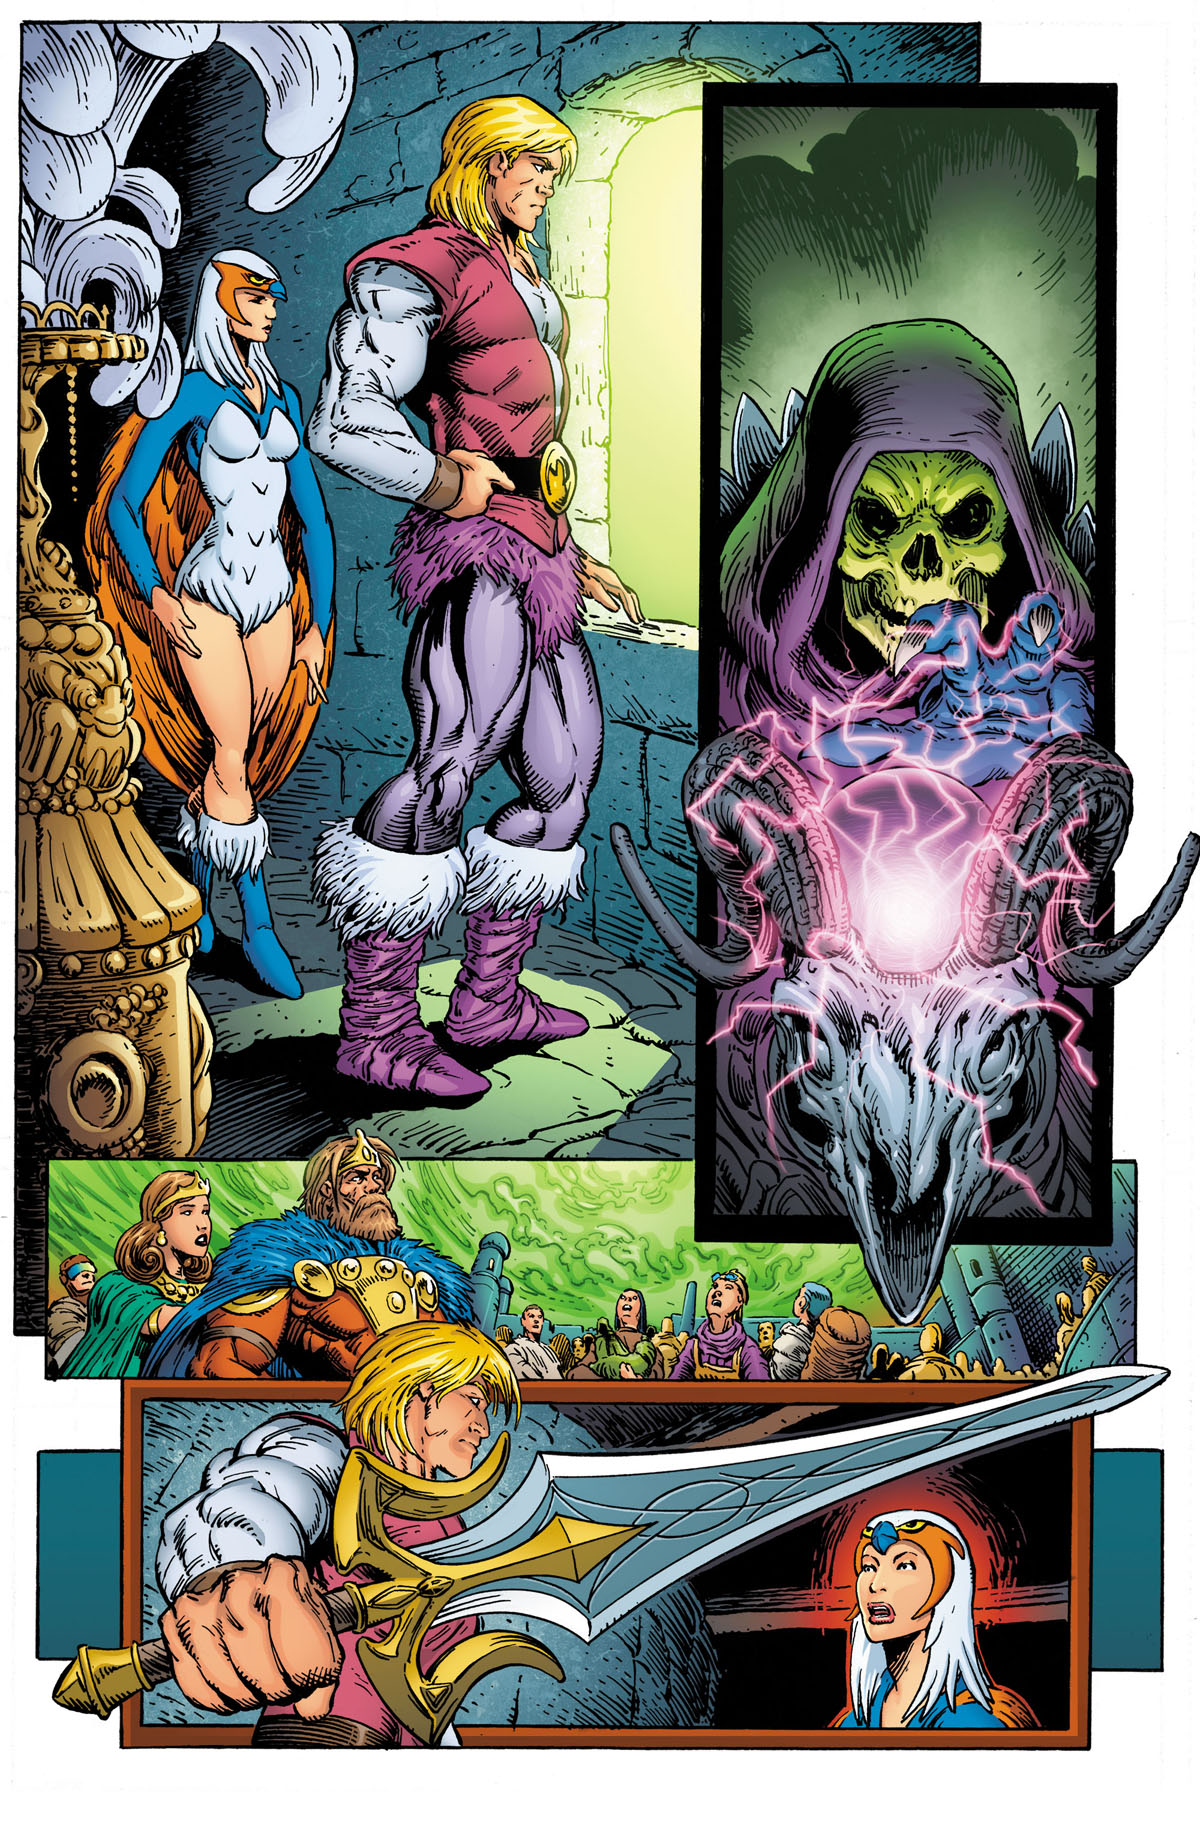 He-Man and the Masters of the Multiverse #1 page 1